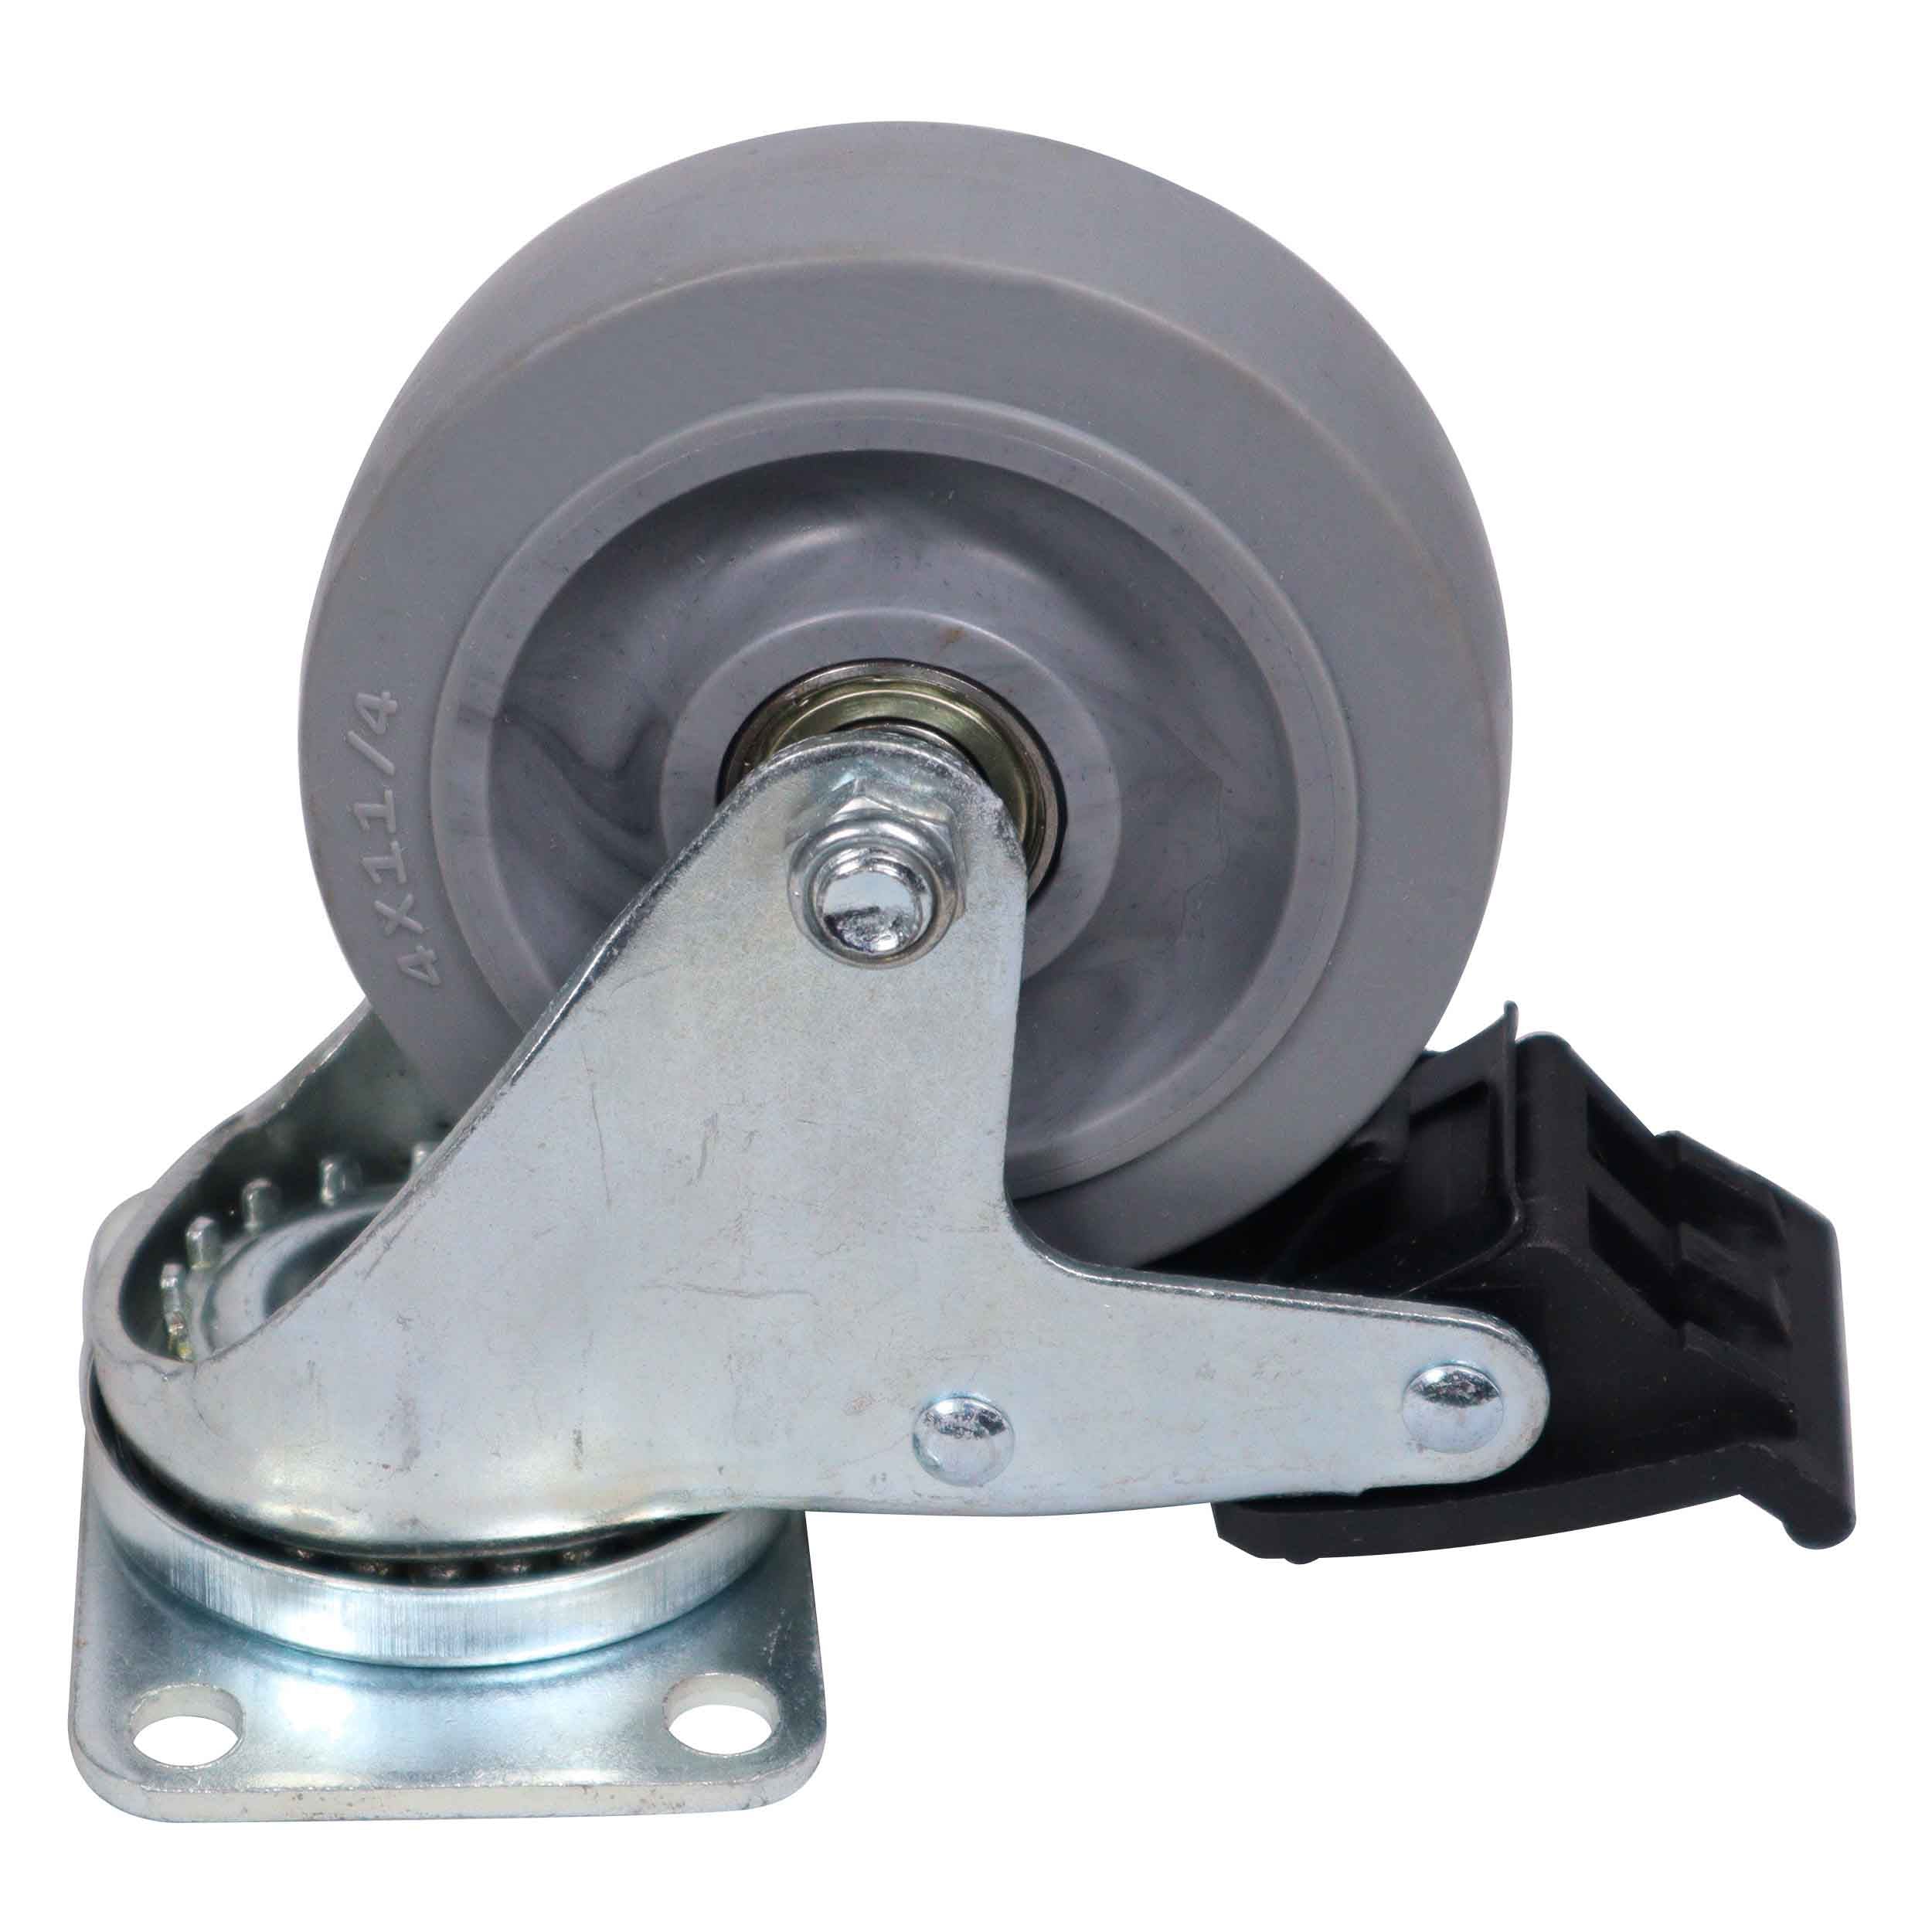 ProX X-CASTER4GR95X65, Gray Replacement 4 inch Industrial Grade Caster Wheels - Set of (4) by ProX Cases